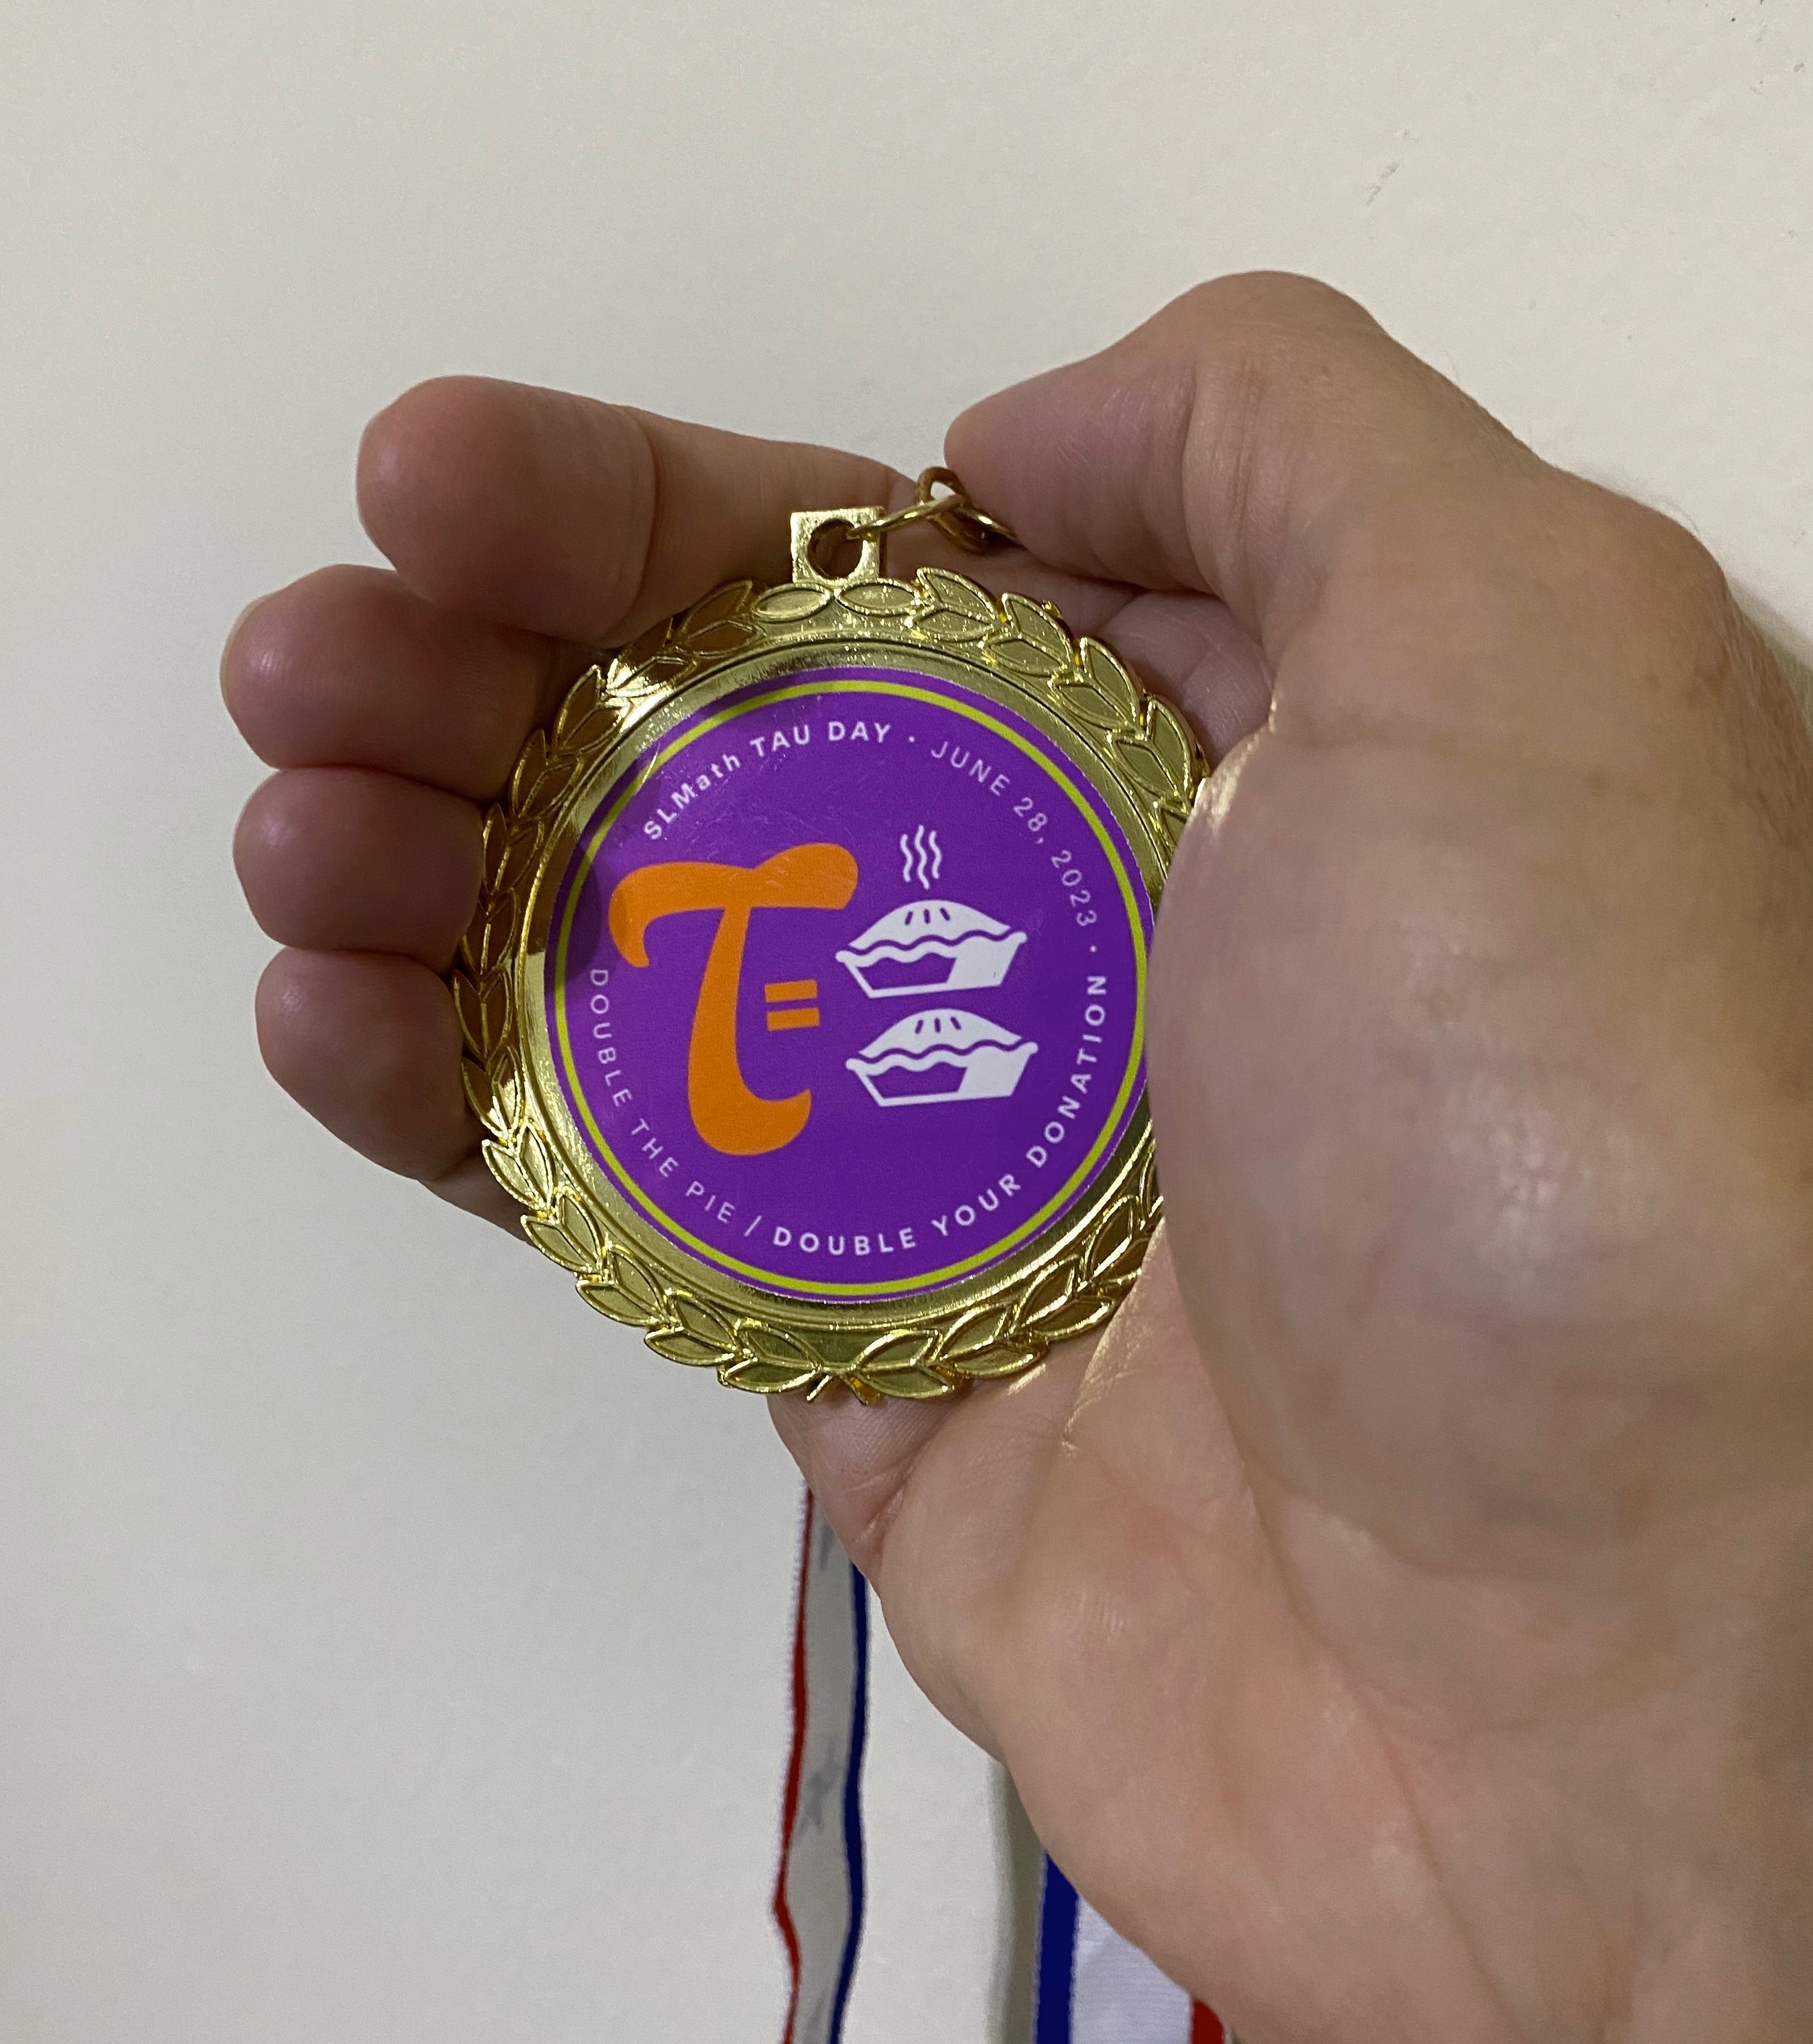 Tau Day medal from SLMath